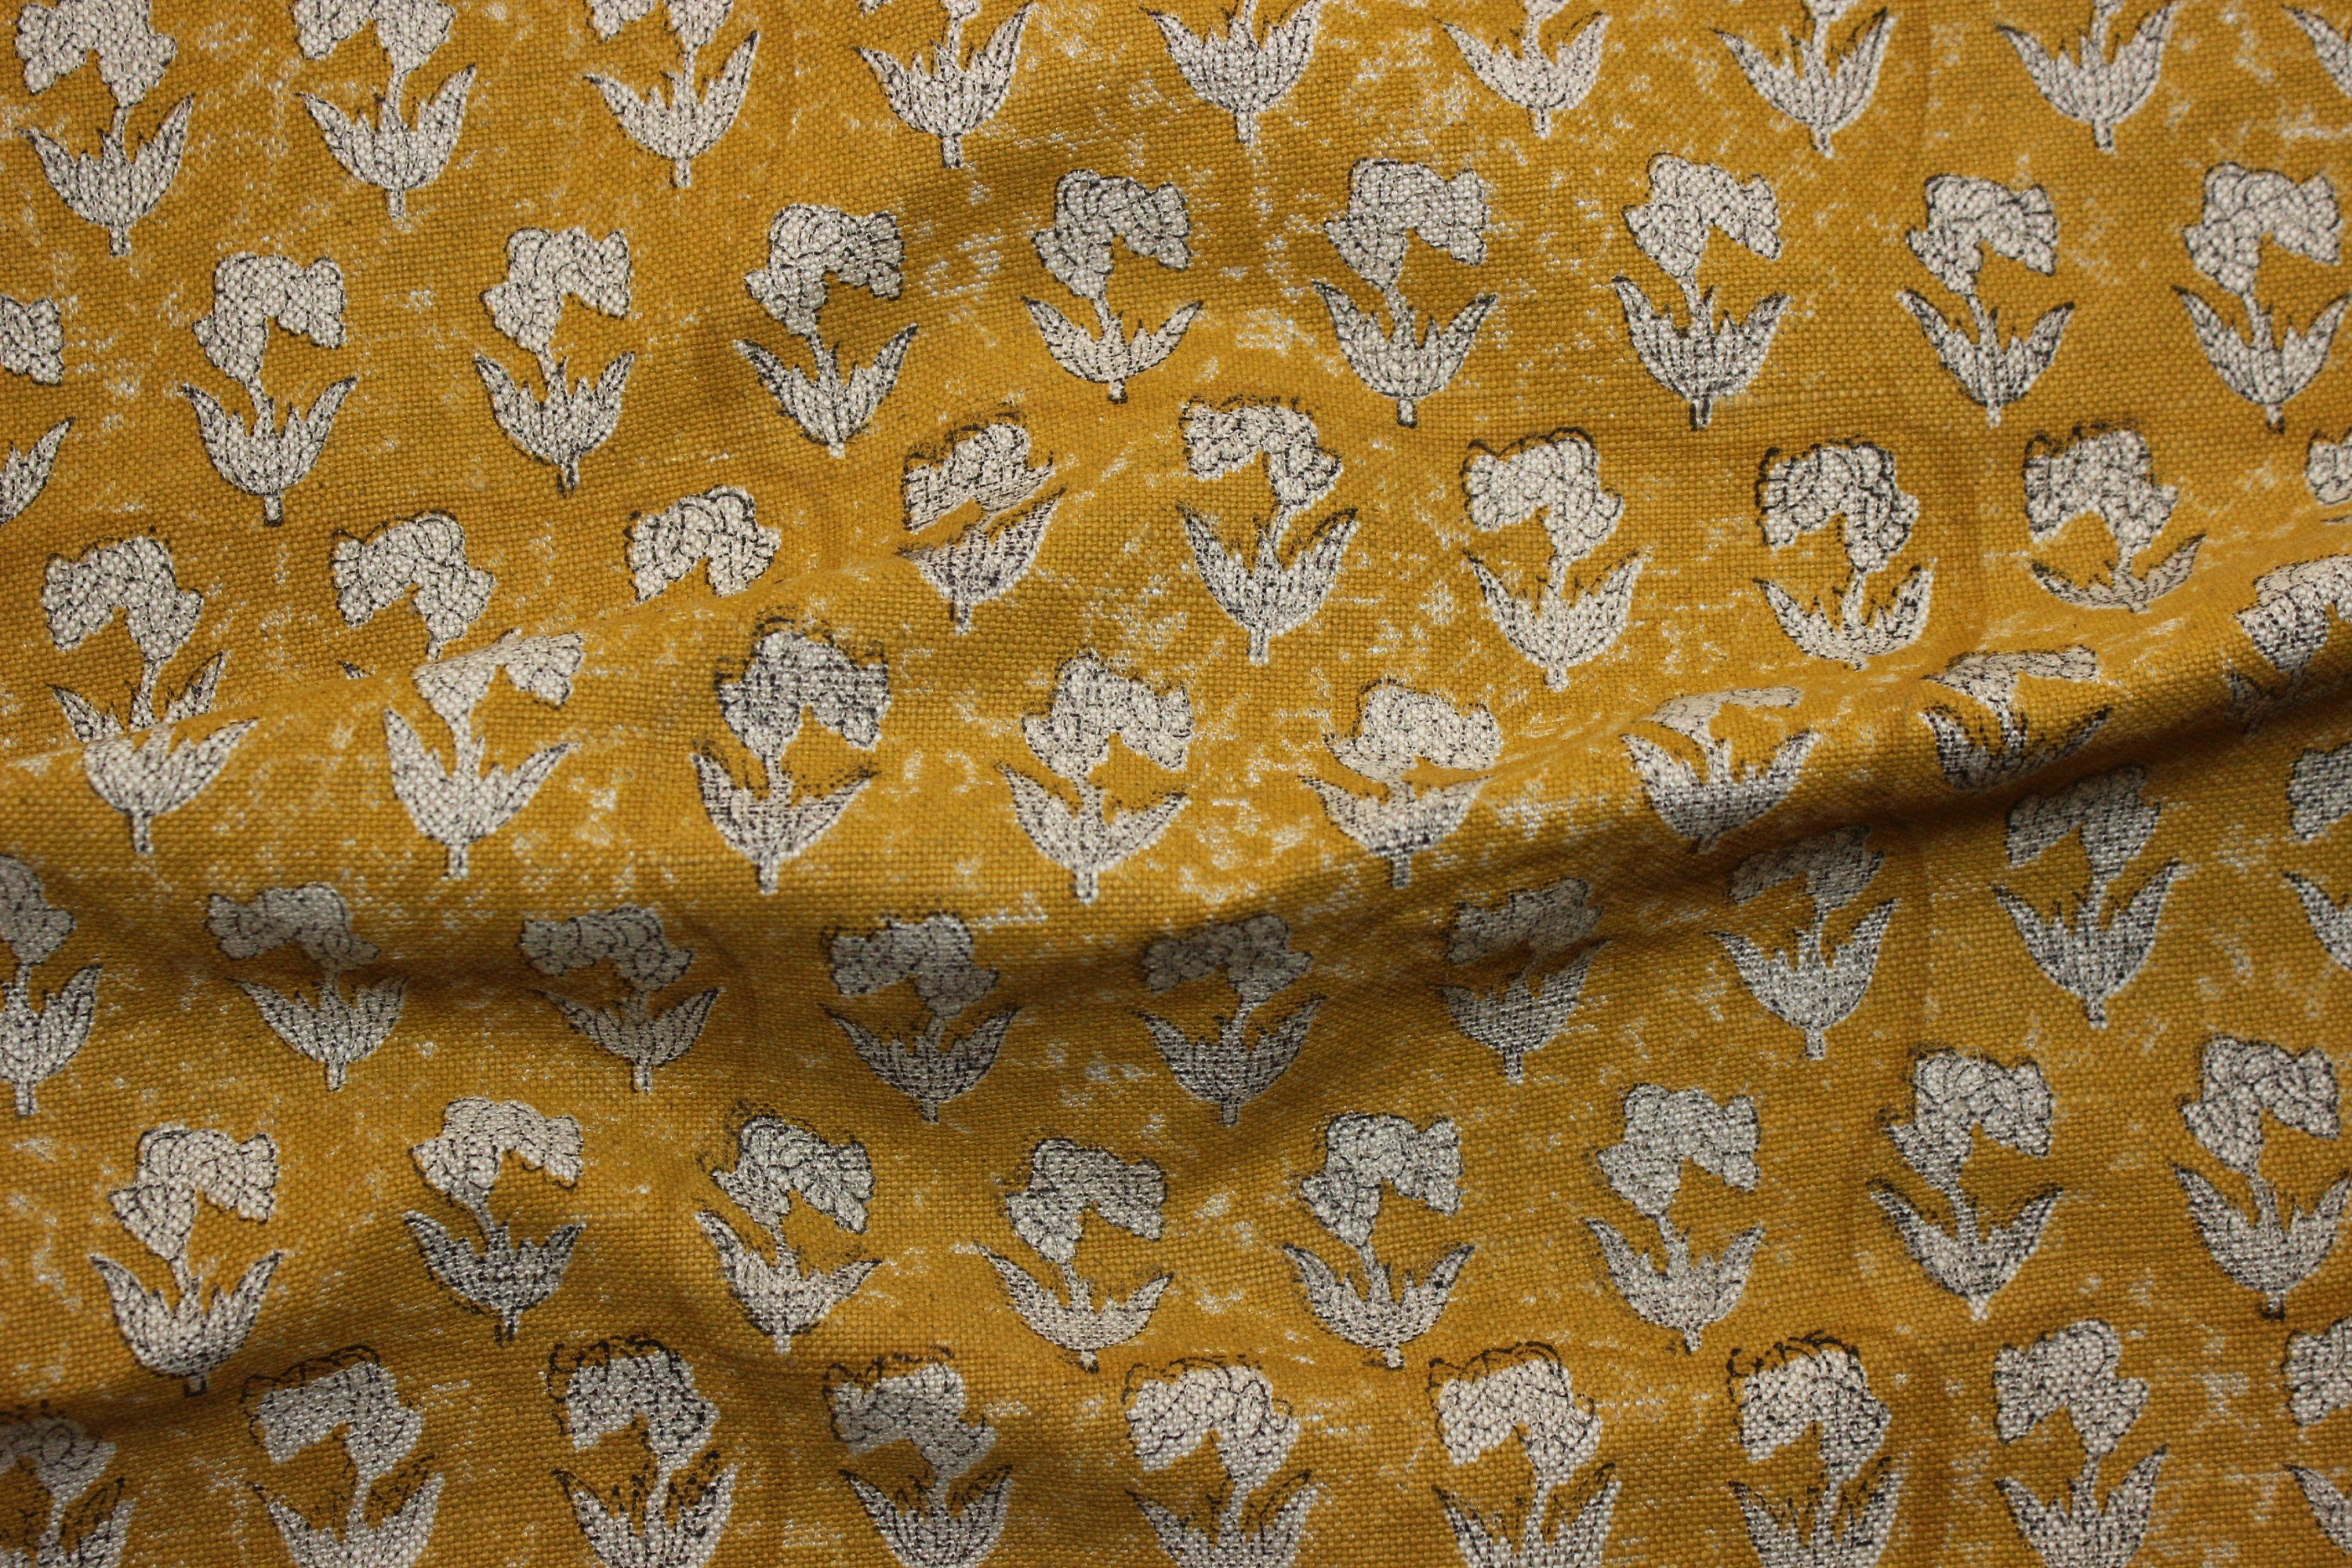 Block Print Linen Fabric, Thick Handloom Linen Fabric Block Print Mustard Color Floral Linen Fabric For Cushion Pillow Cover, Upholstery Fabric